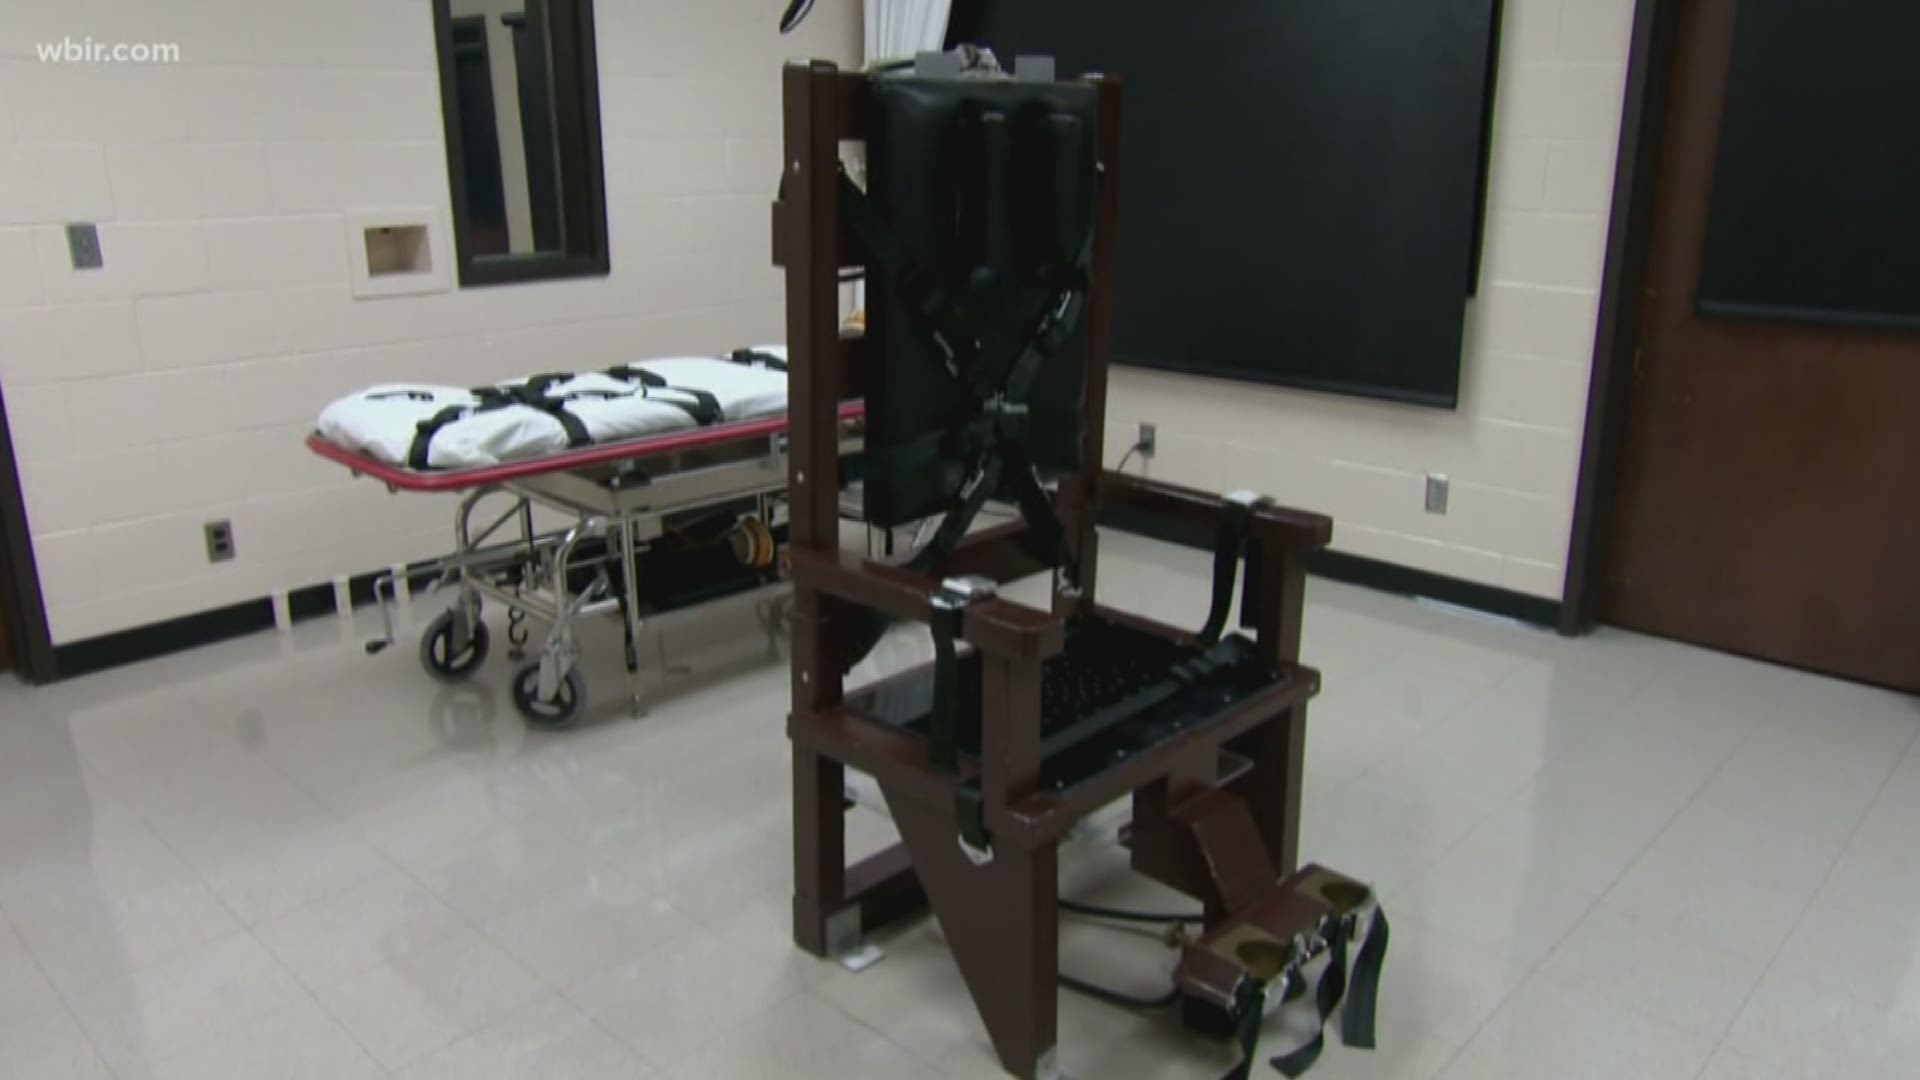 Three men were executed by the state of Tennessee in 2018, two chose the electric chair.